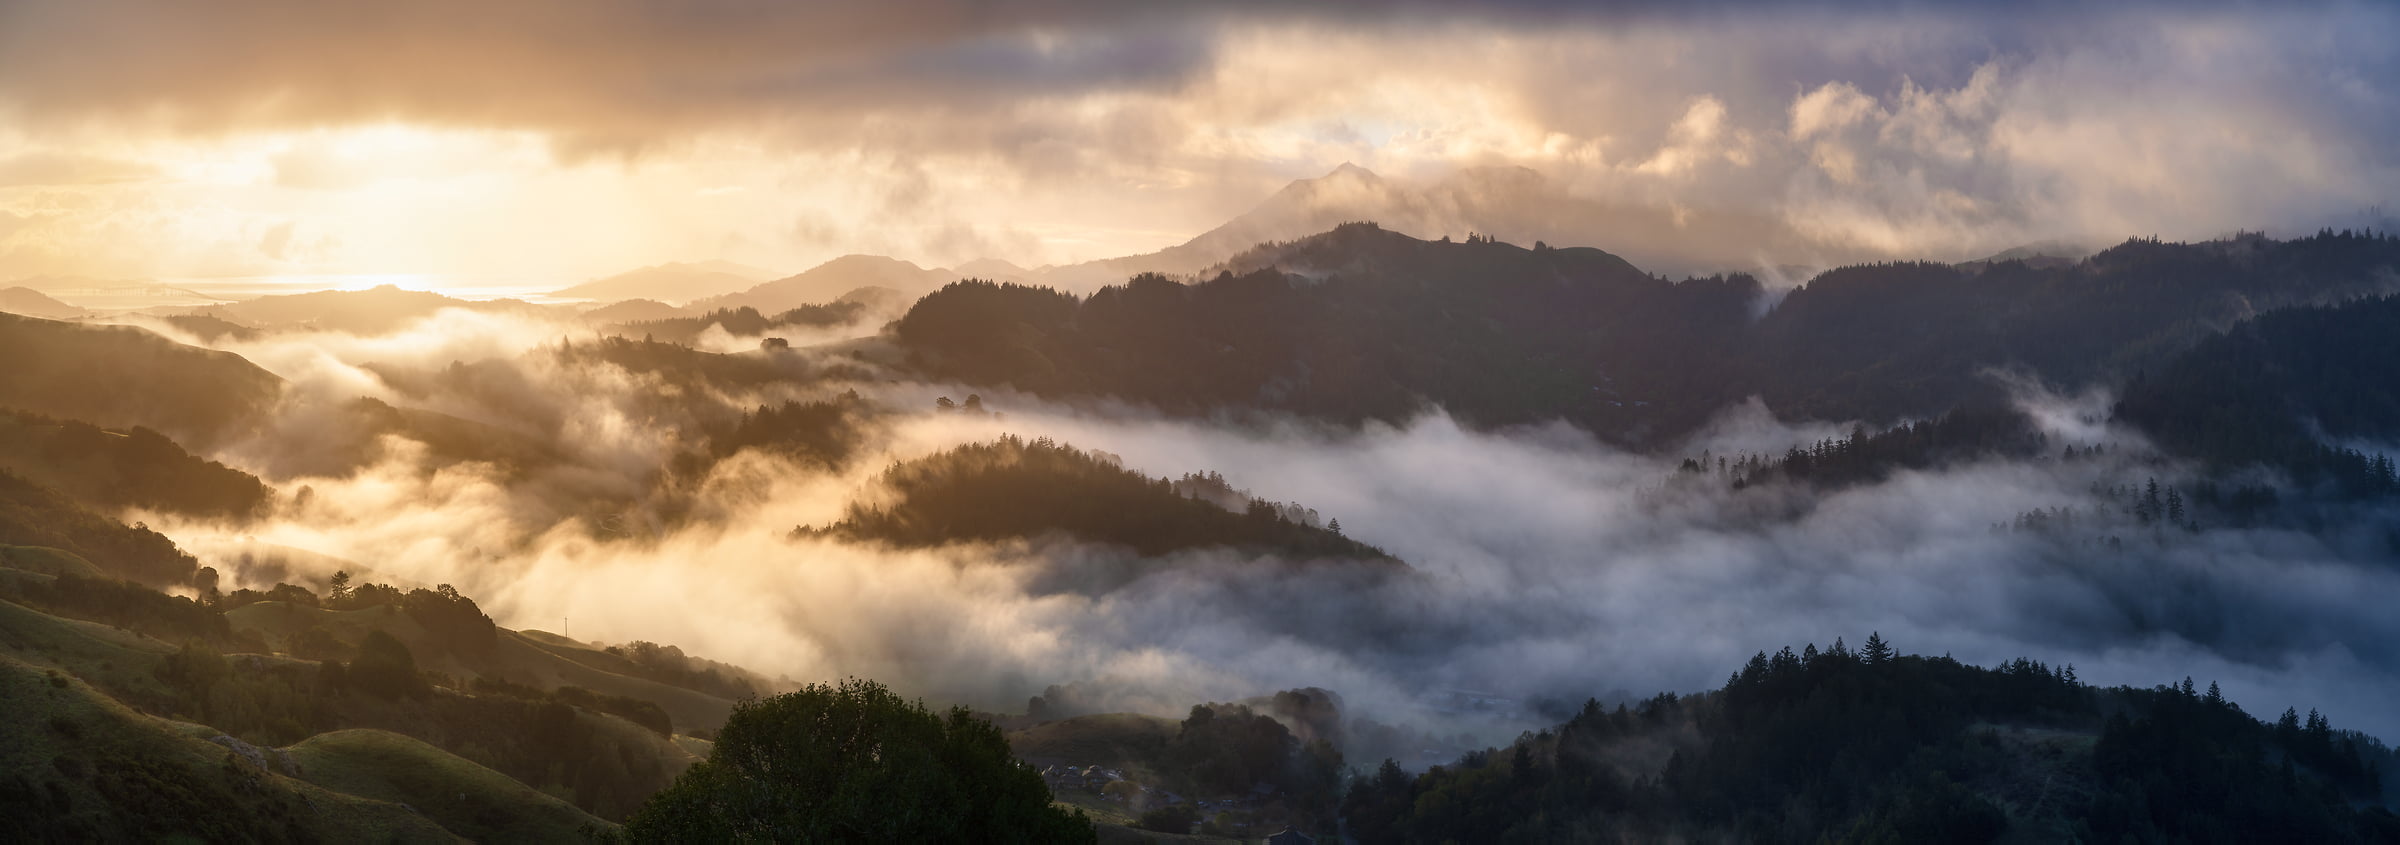 150 megapixels! A very high resolution, large-format VAST photo print of a beautiful landscape; wallpaper photograph created by Jeff Lewis in Marin County, California